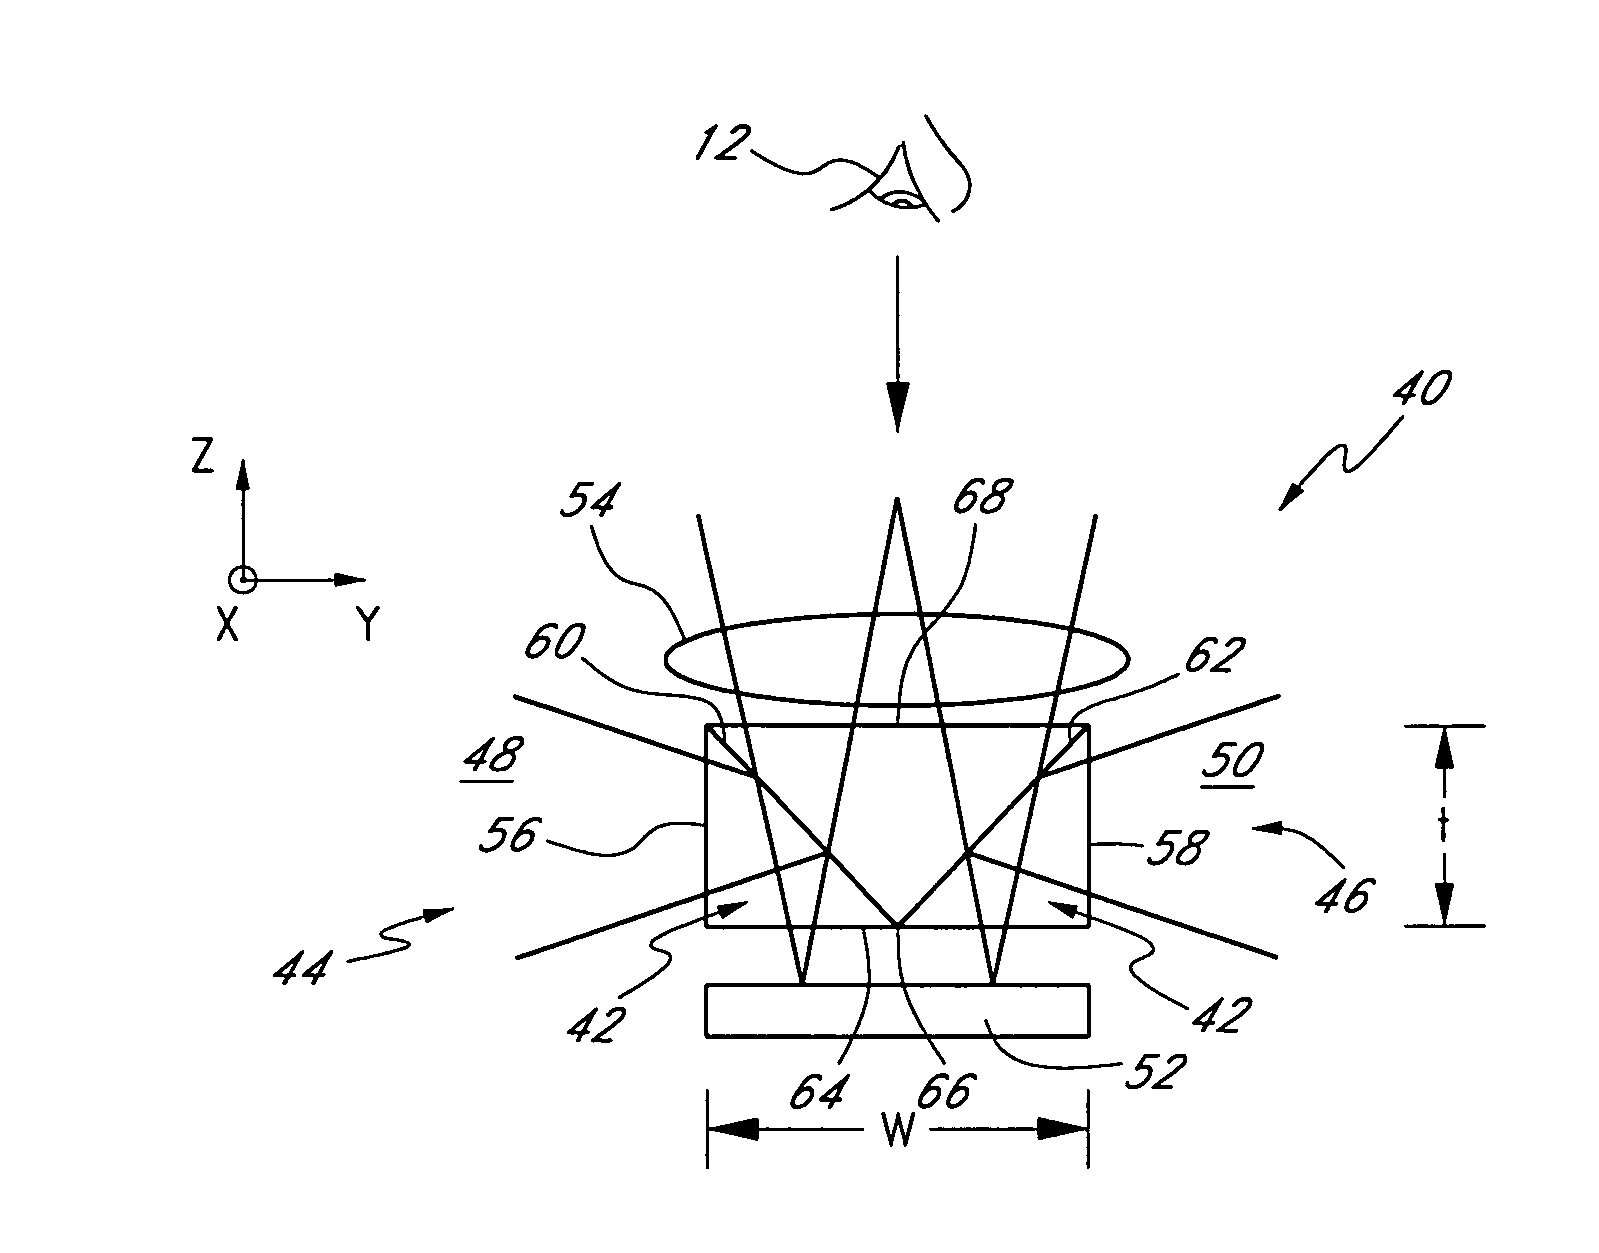 Light distribution apparatus and methods for illuminating optical systems